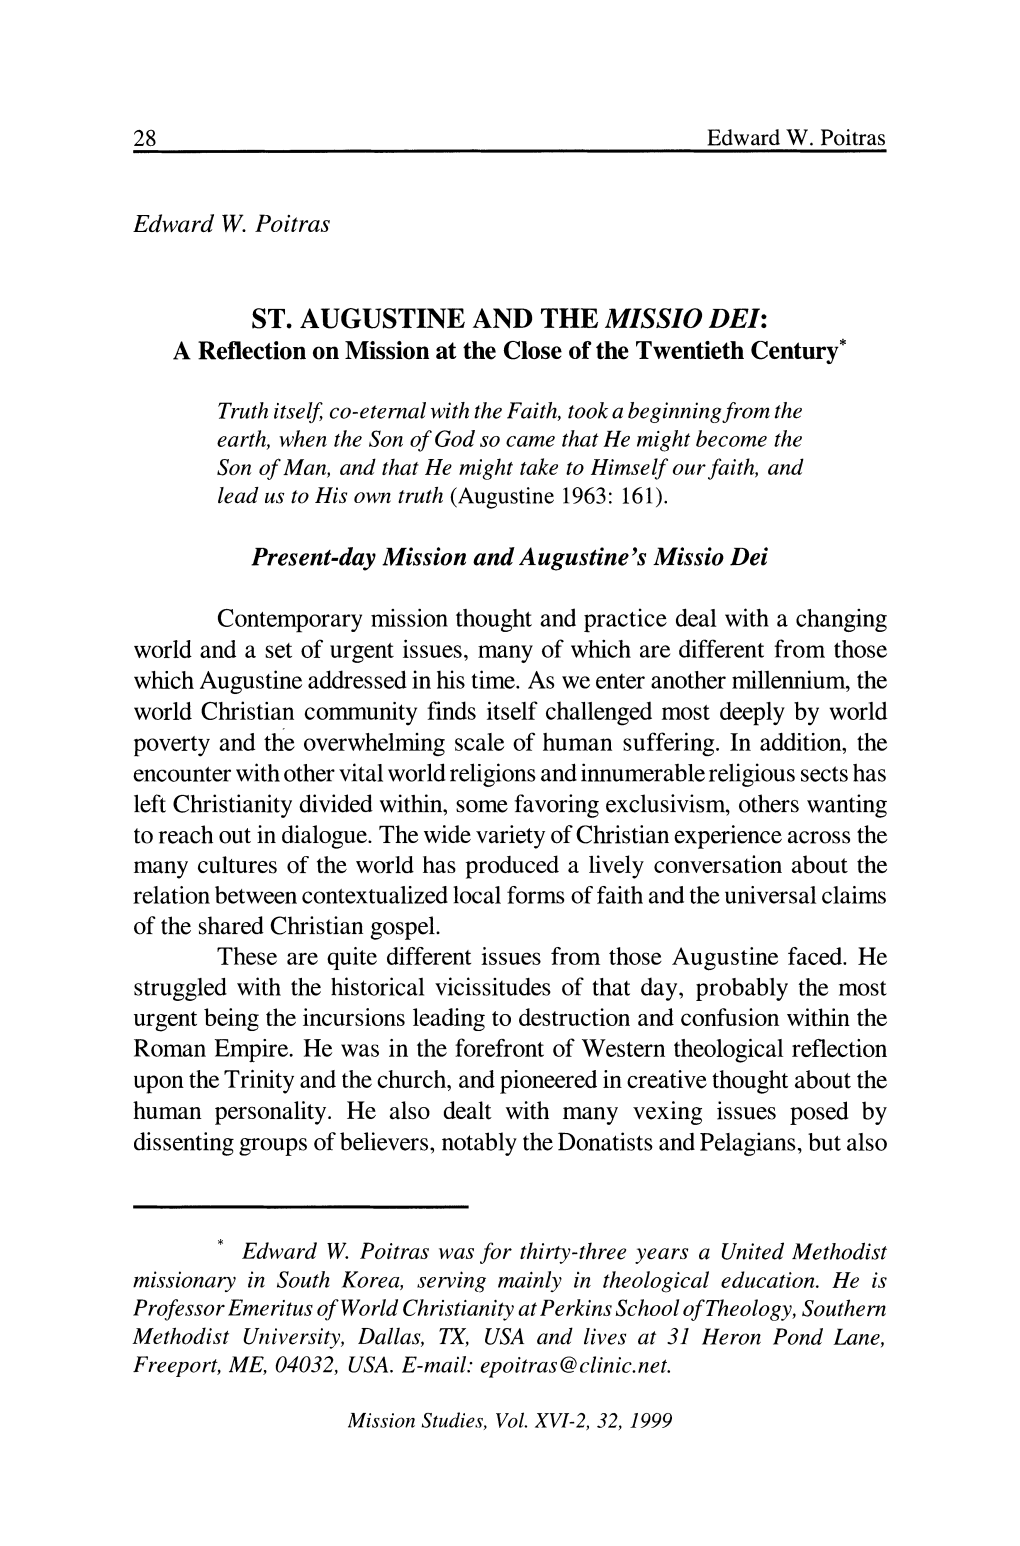 ST. AUGUSTINE and the MISSIO DEI: a Reflection on Mission at the Close of the Twentieth Century'